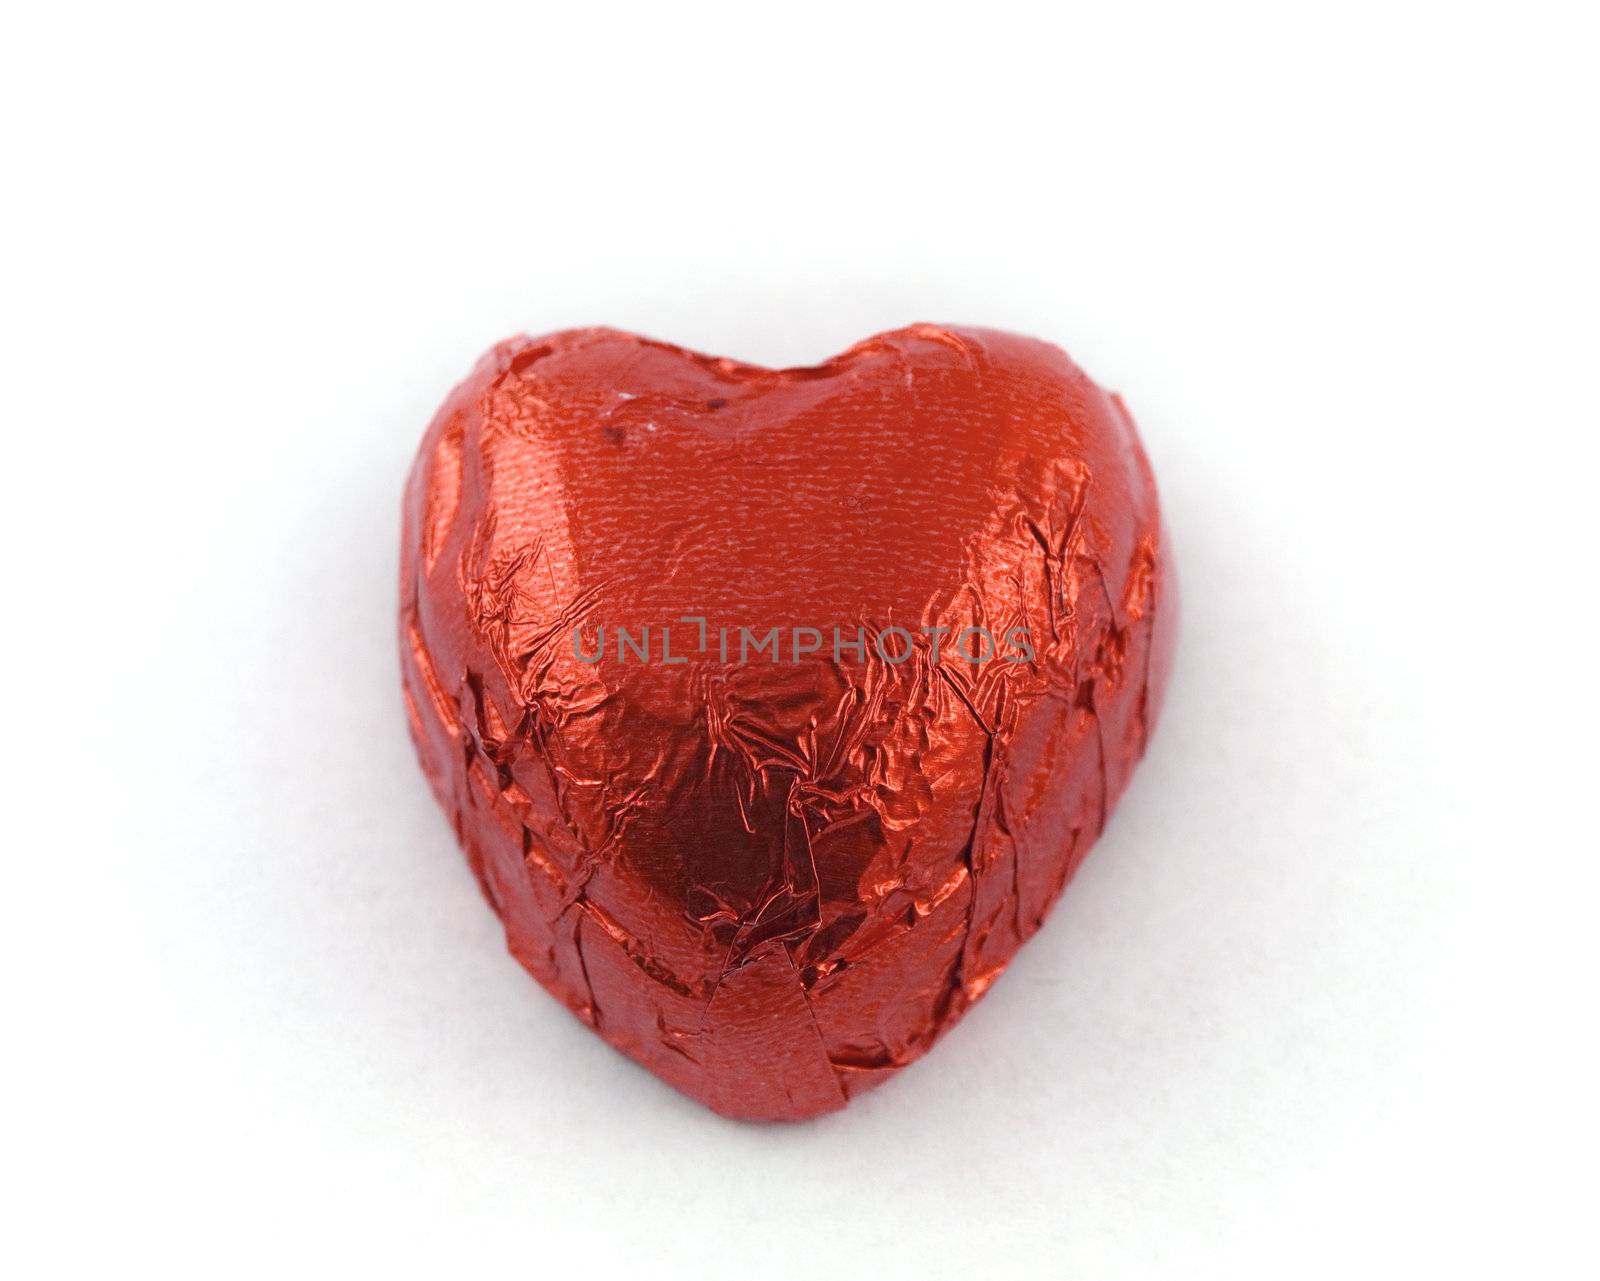 Heart Shaped Chocolate in Red Tin Foil by bobbigmac